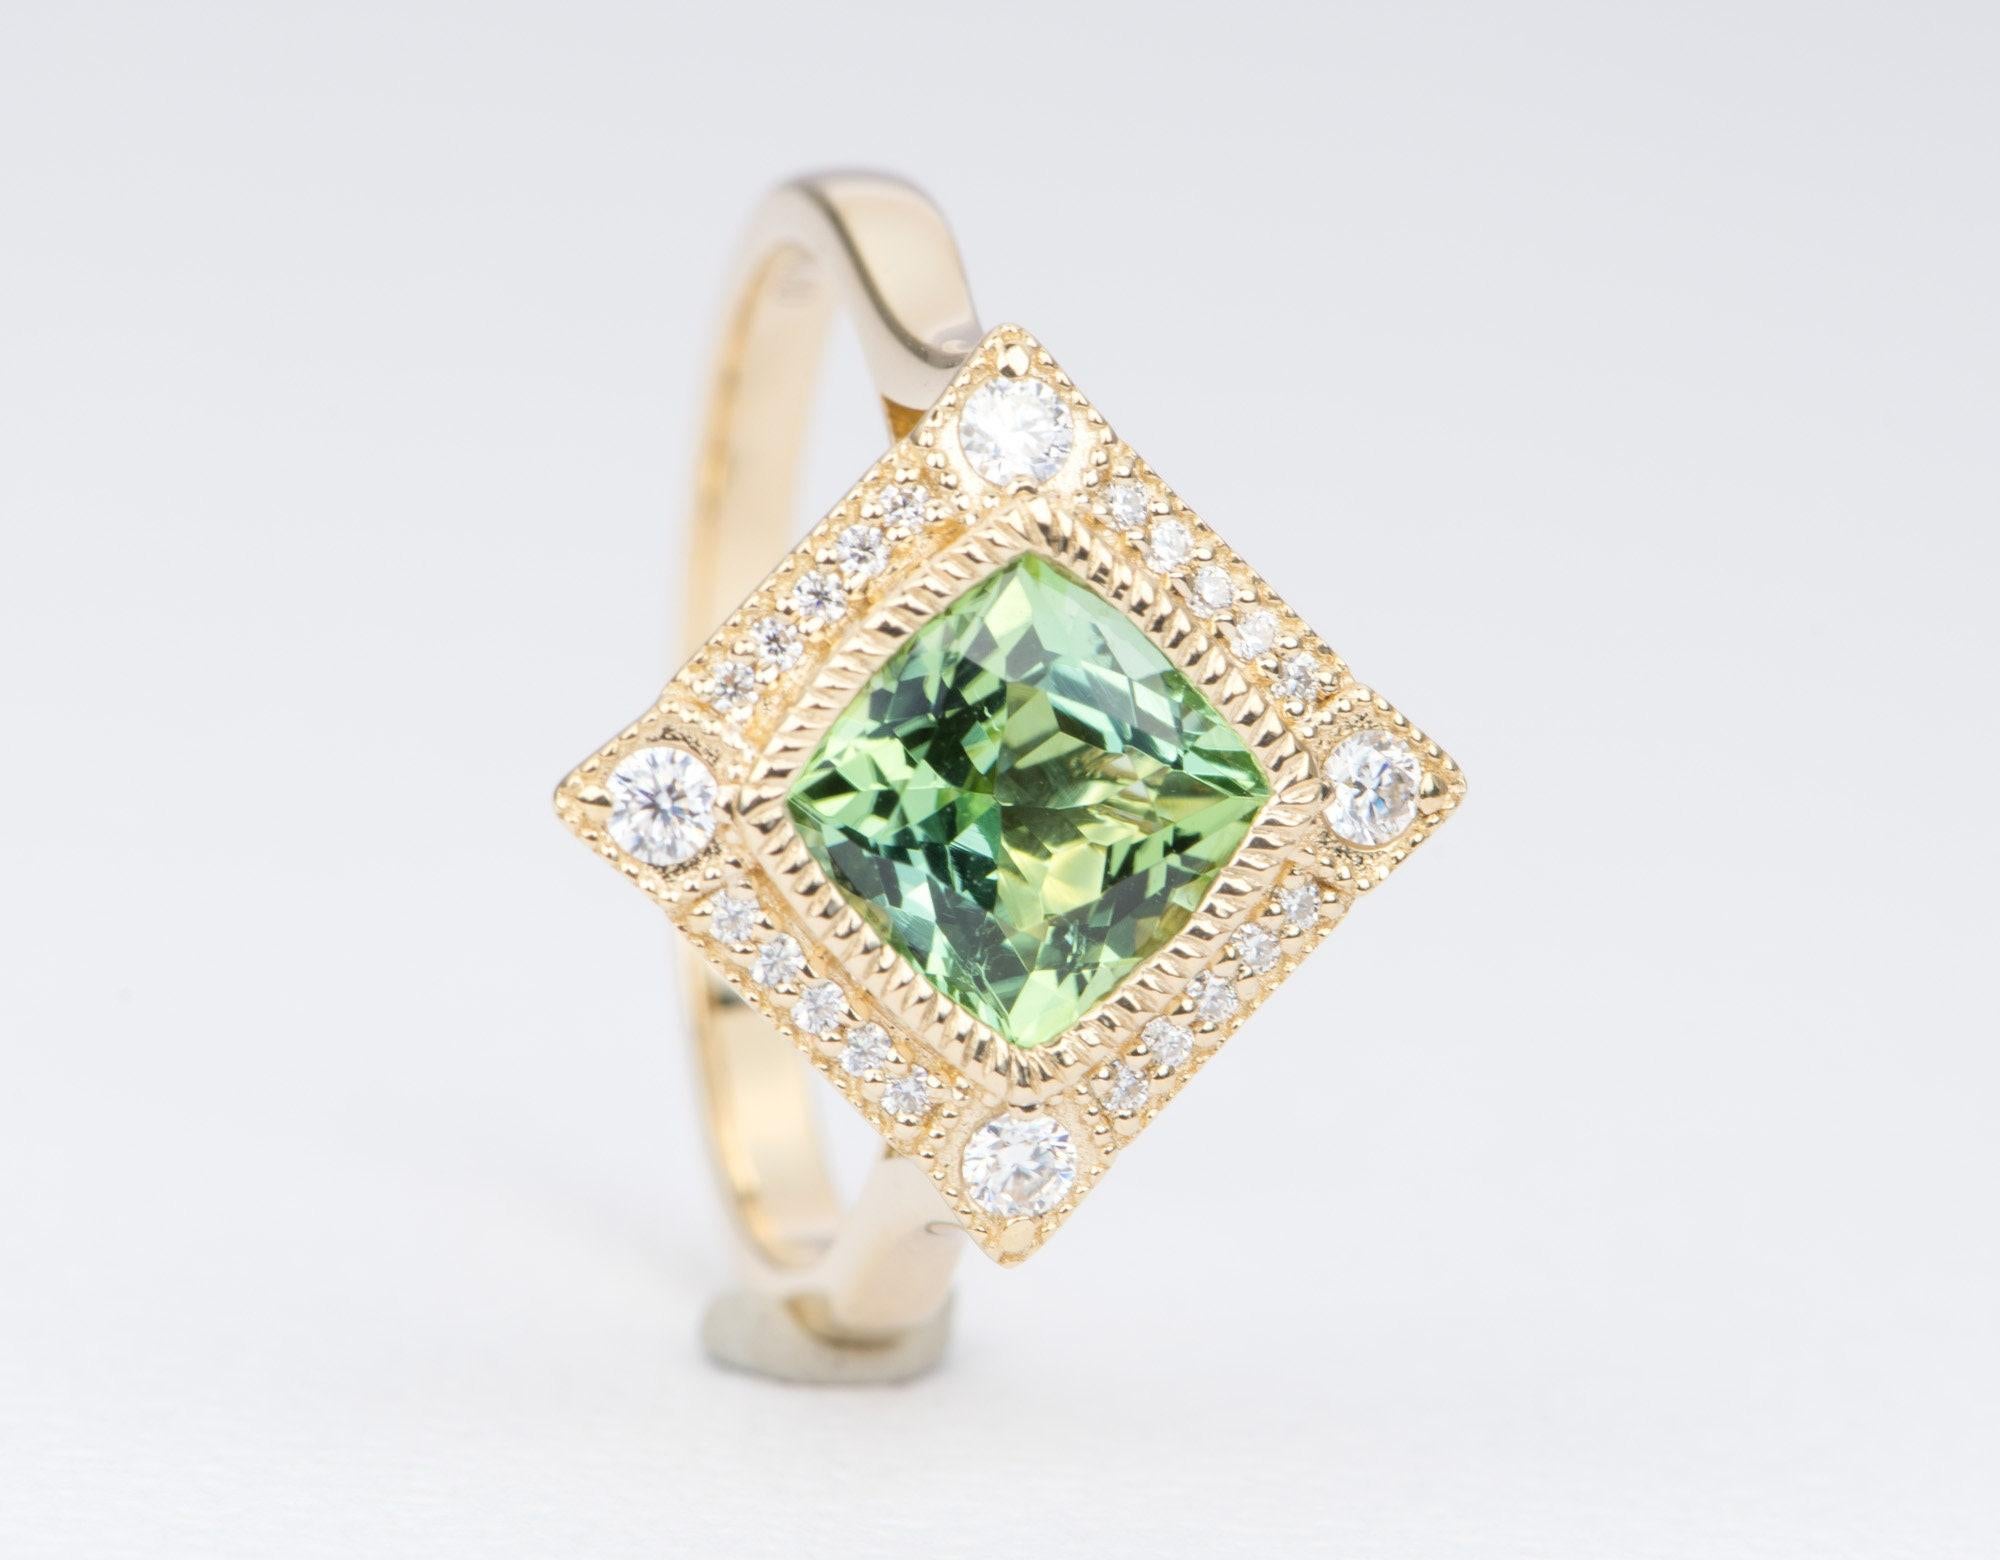 1.5ct Mint Green Tourmaline 14K Gold Moissanite Halo Engagement Ring AD2219-3 In New Condition For Sale In Osprey, FL